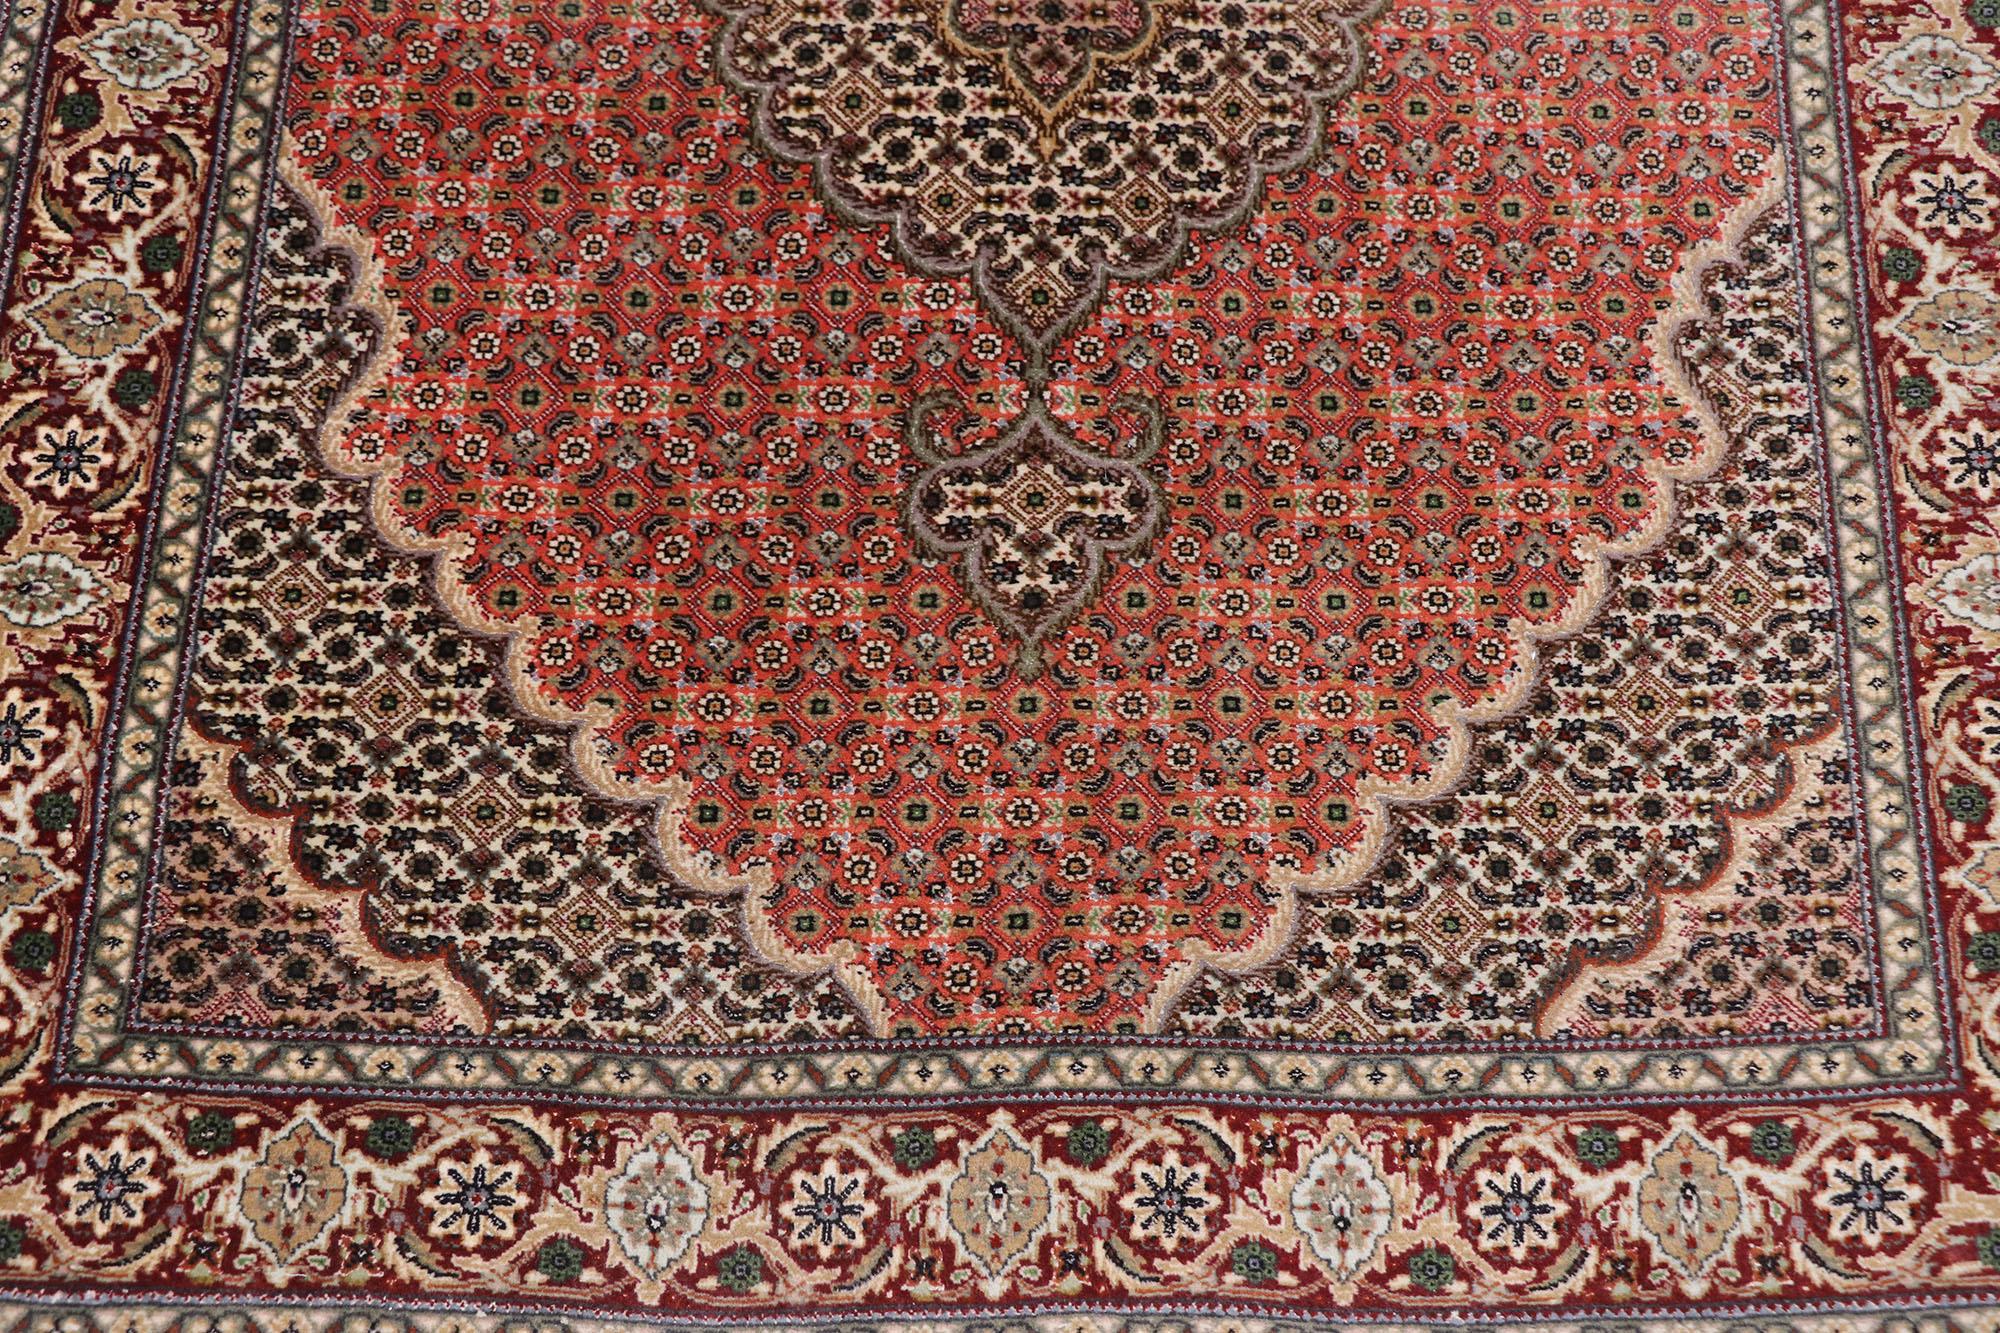 Vintage Persian Mahi Tabriz Rug with Neoclassical Victorian Style In Good Condition For Sale In Dallas, TX